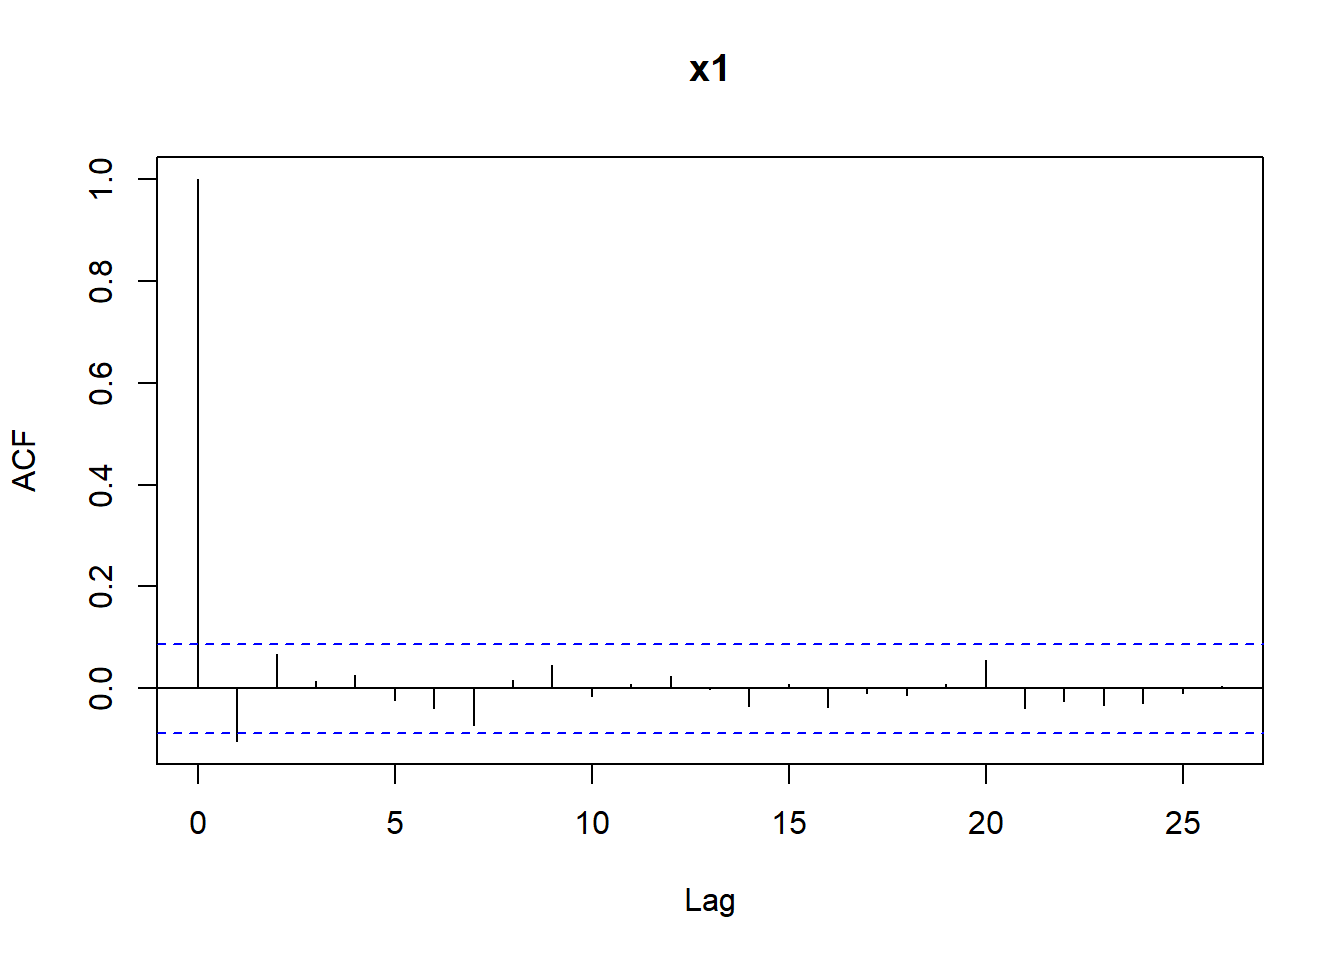 Autocorrelations for the sequences x1 and x2.